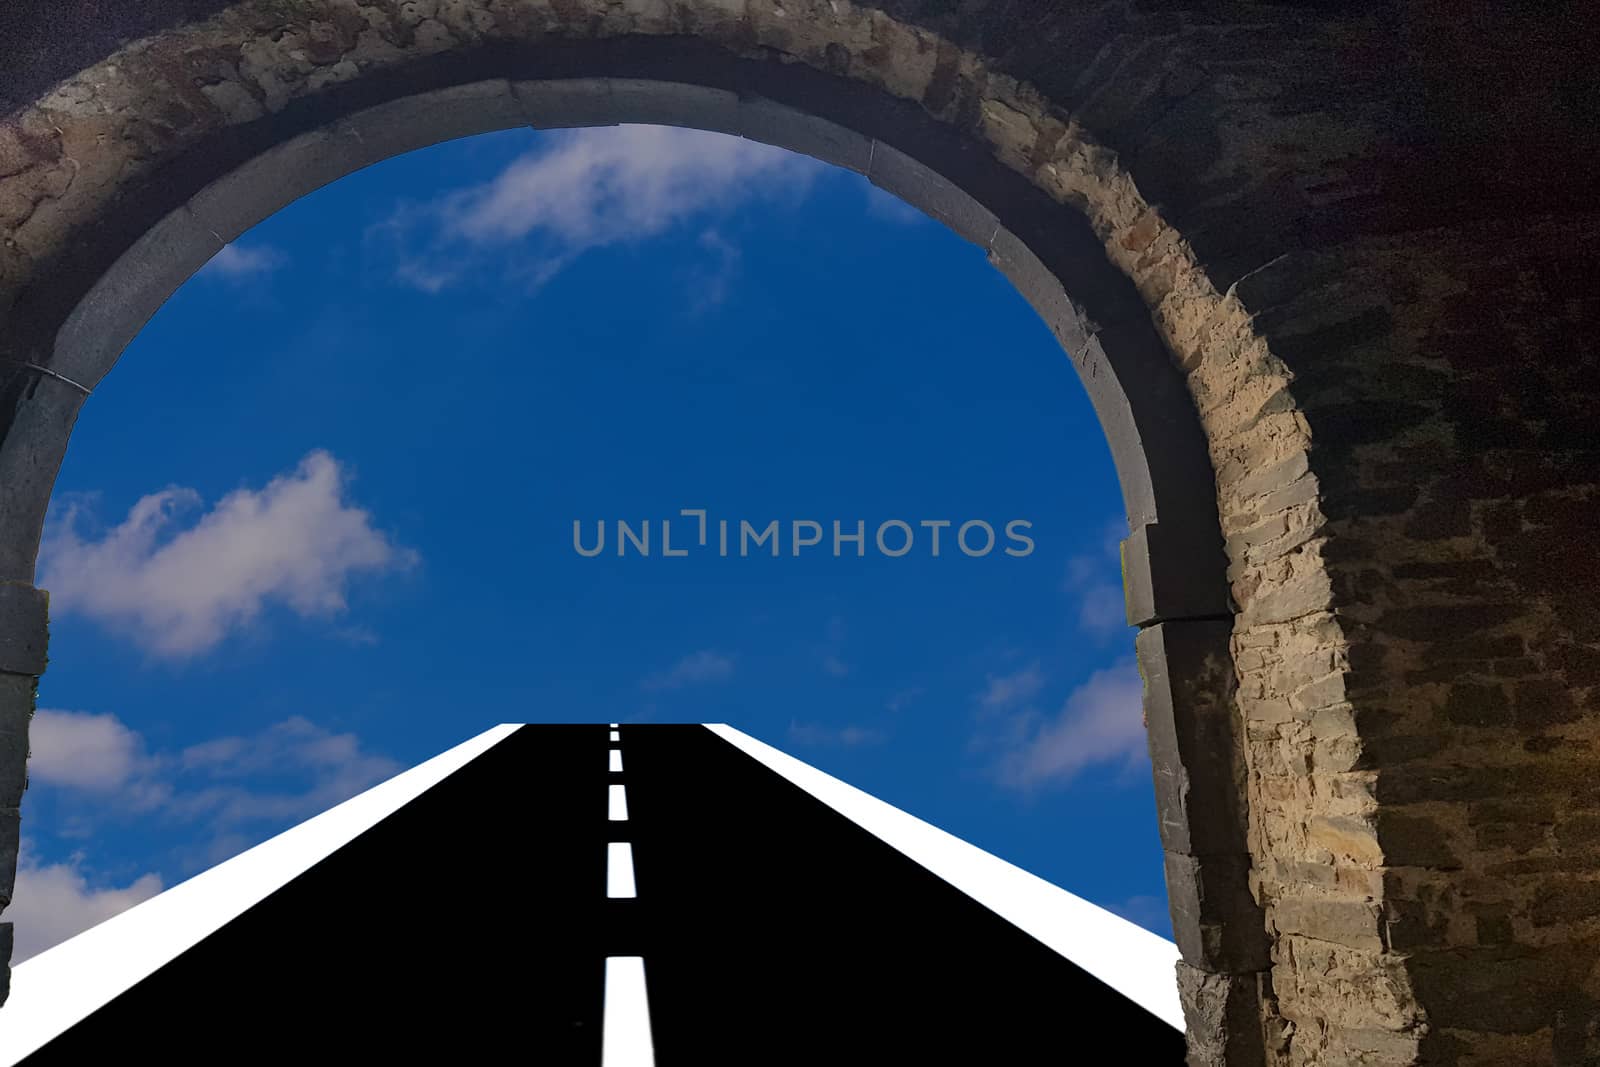 Asphalt road  leading into the blue cloudy sky. Background      by JFsPic